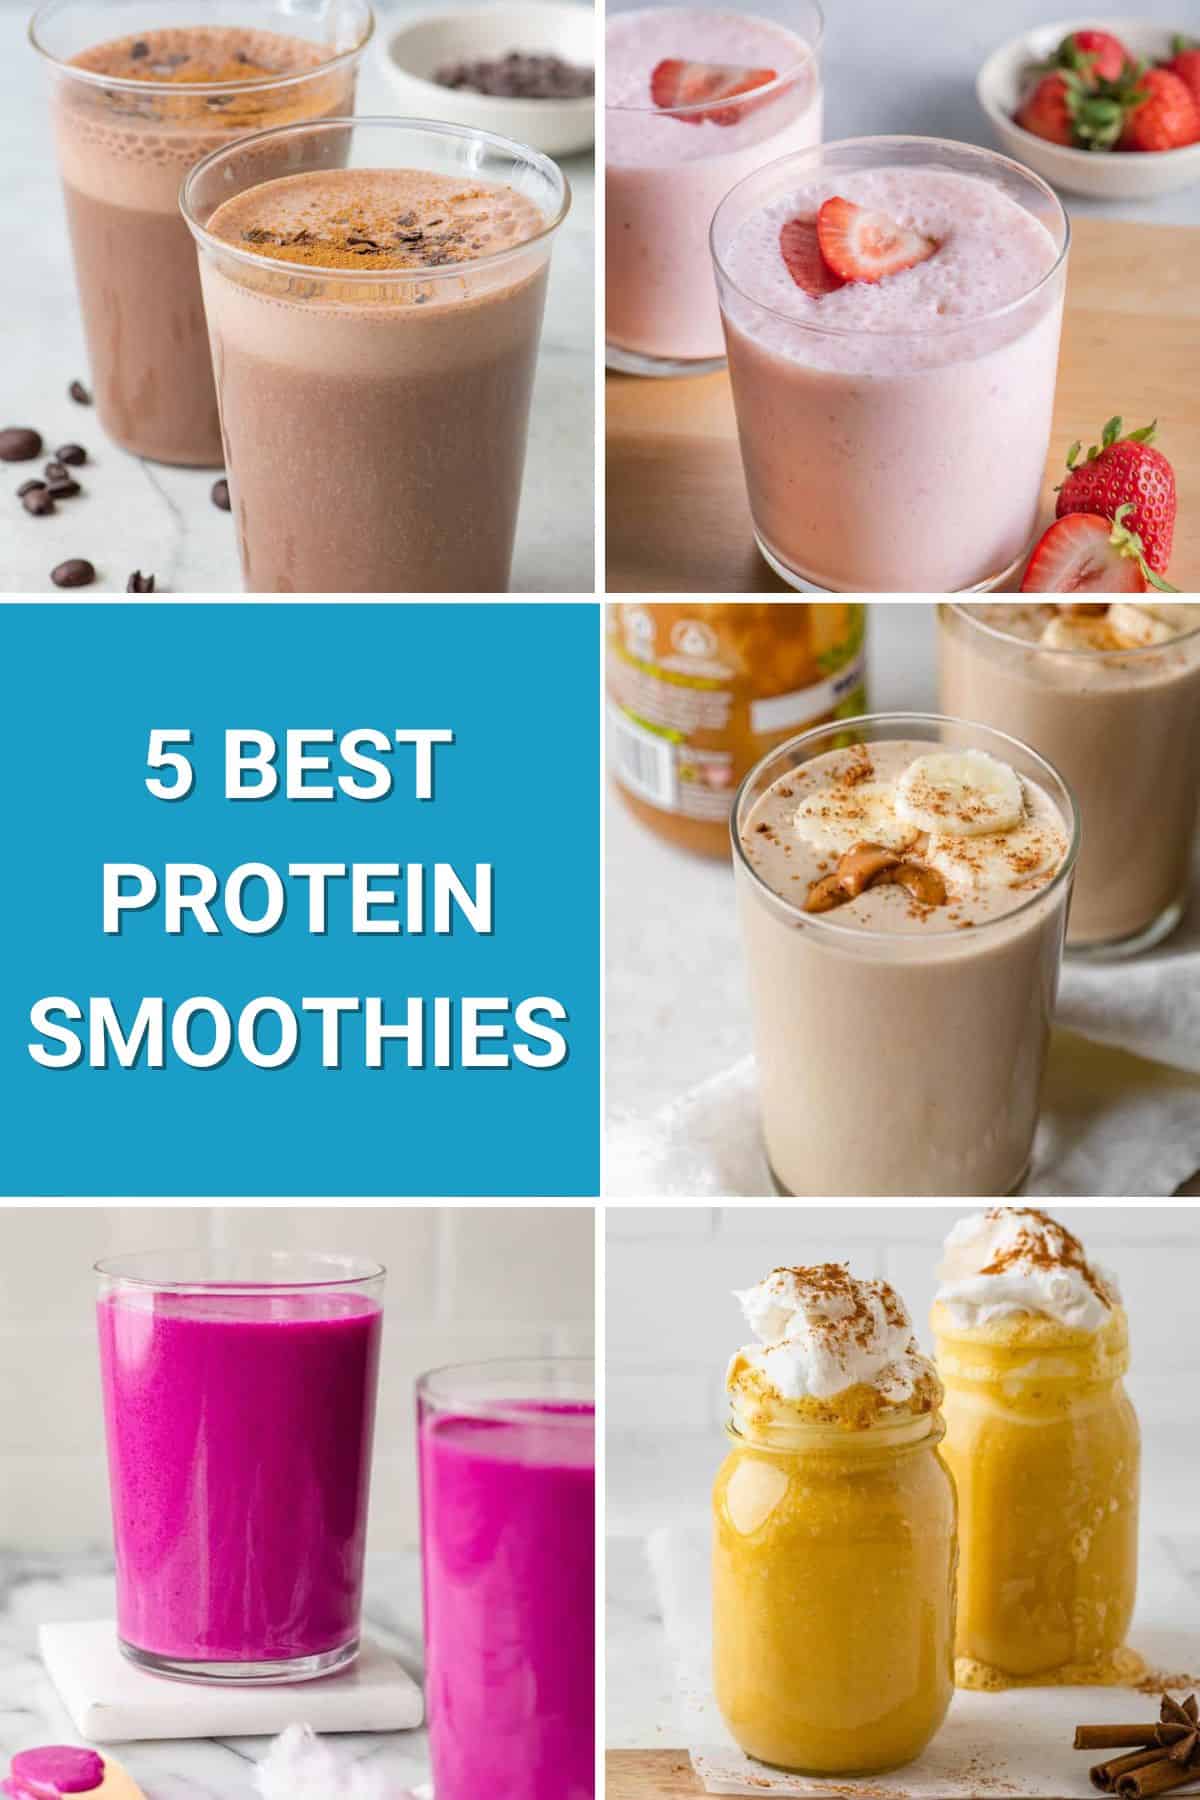 GUIDE: How to Make a Protein Shake, for Newbies